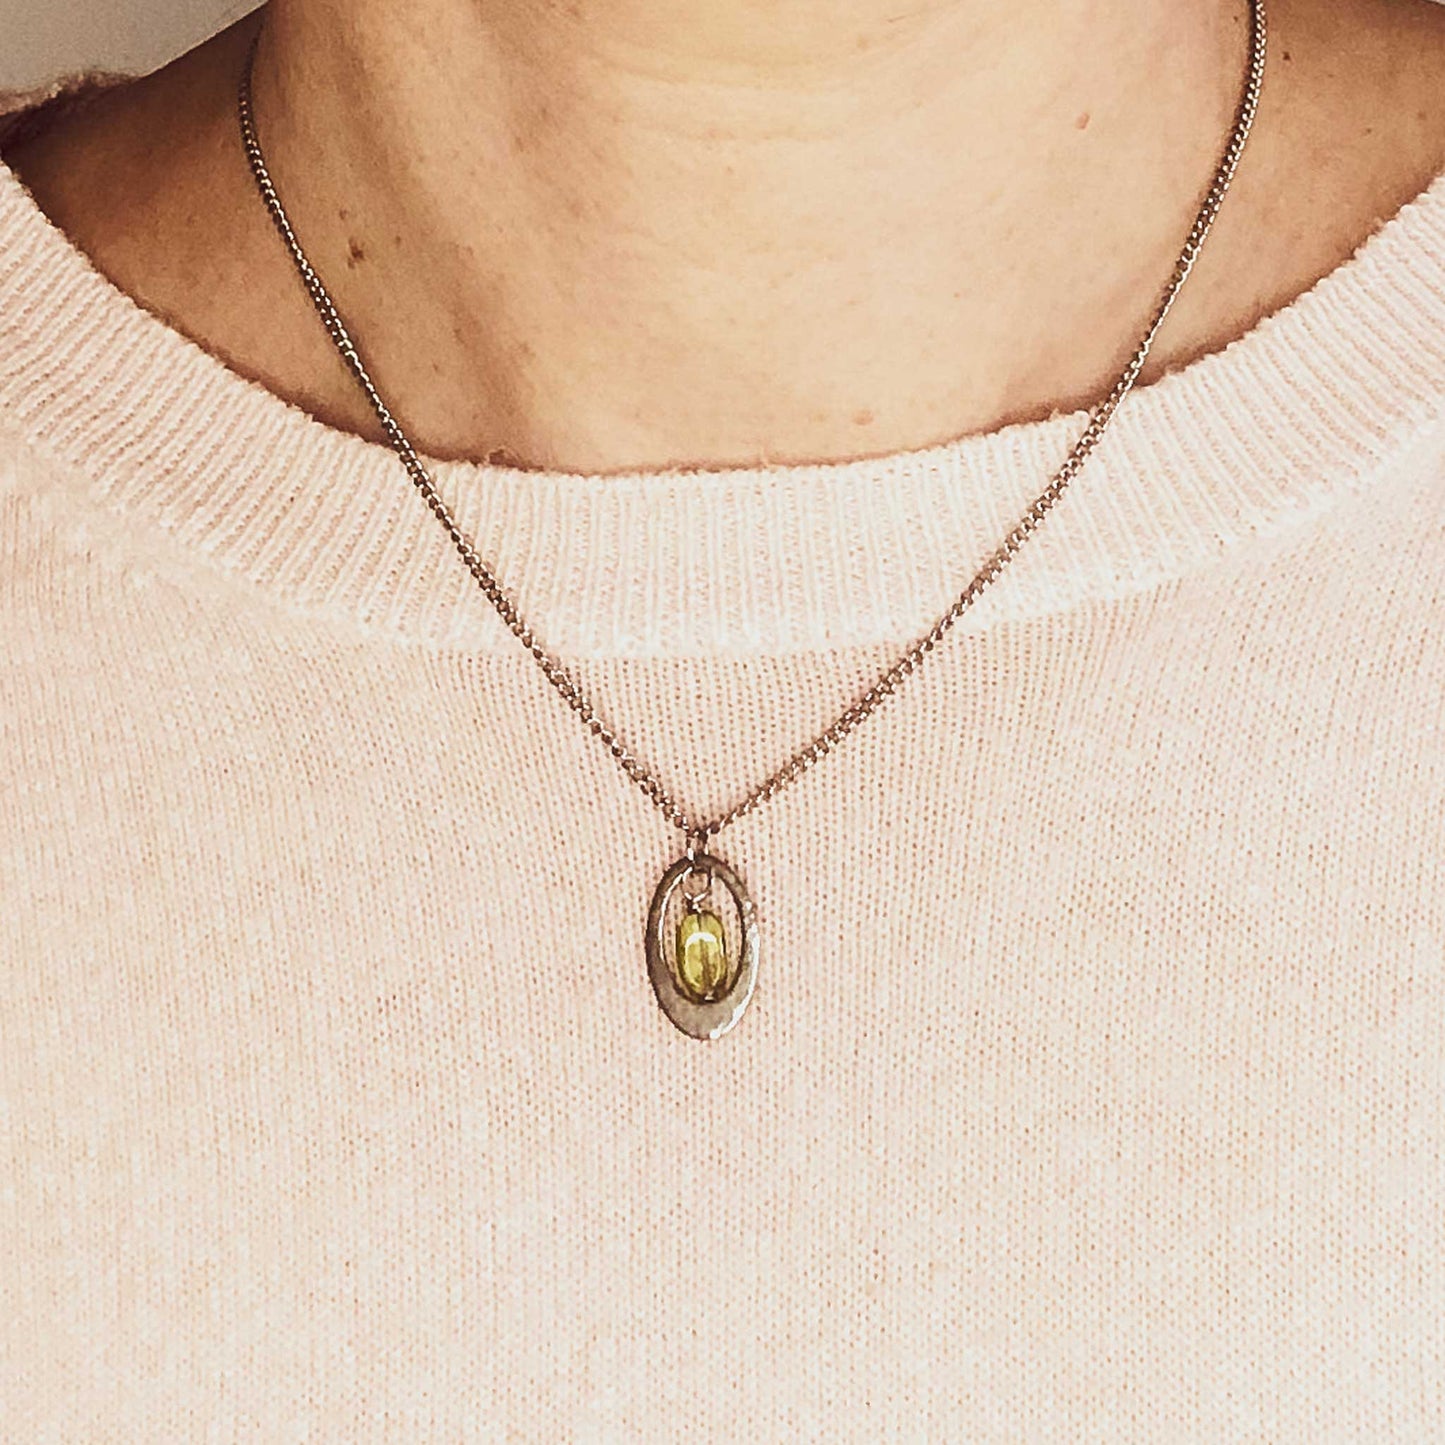 Woman wearing pink jumper and dainty Peridot oval pendant necklace.